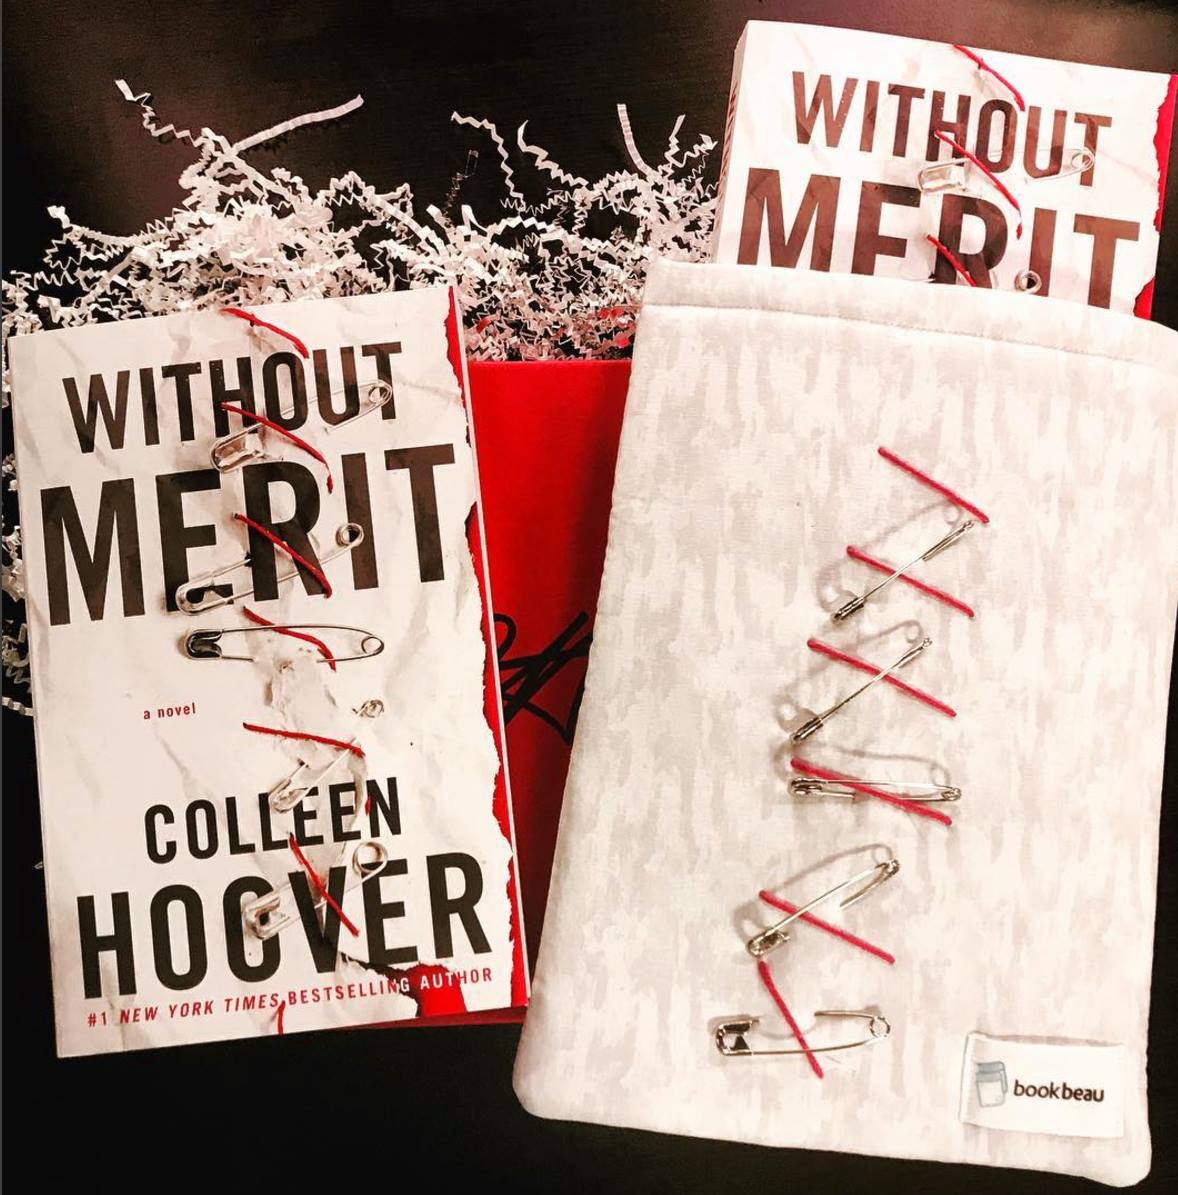 Colleen Hoover Hosting Book Signing for New Book ‘Without Merit’ at the Bookworm Box Saturday